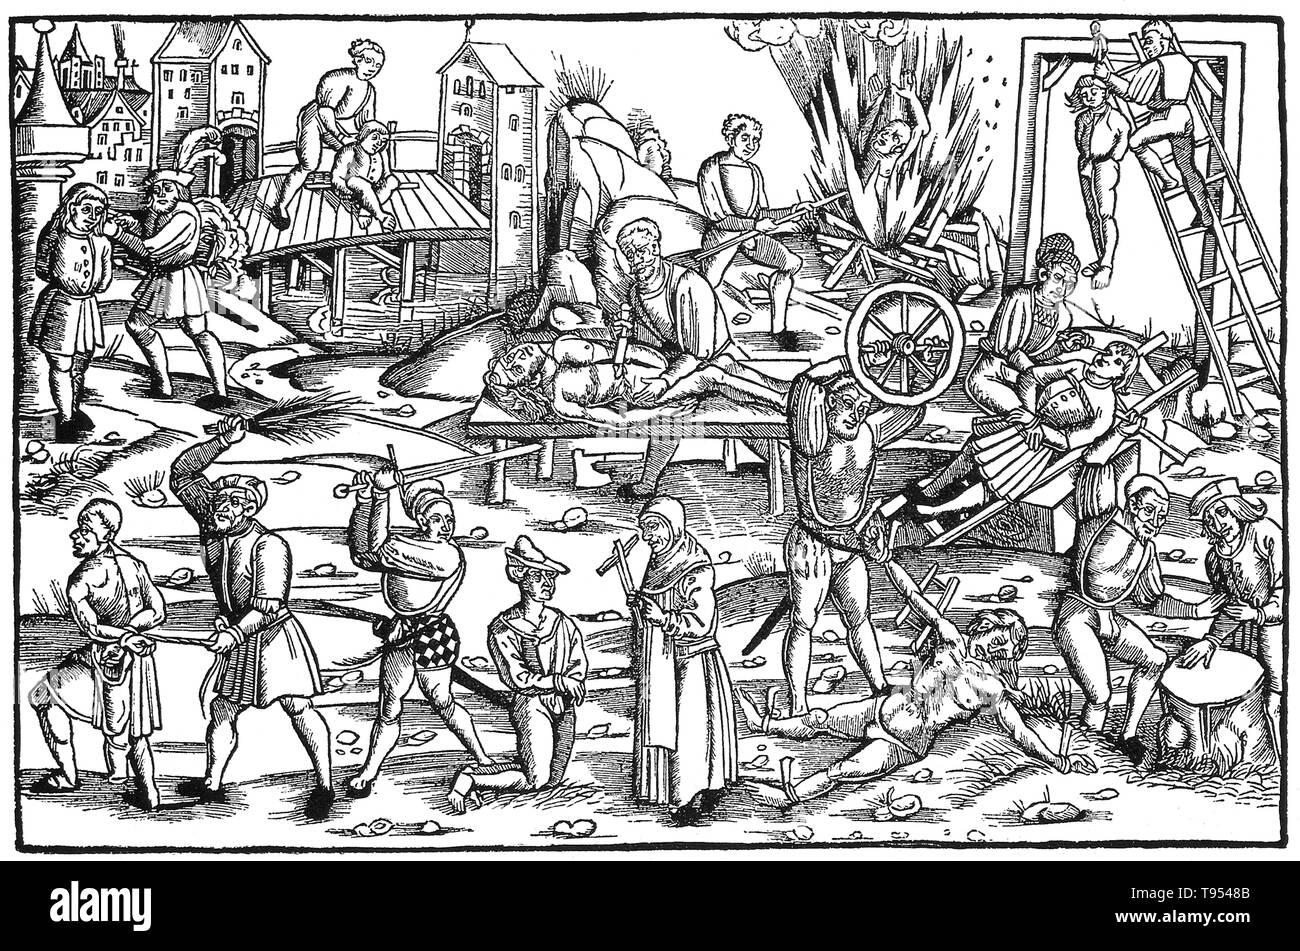 Various forms of mutilation and torture including scourging, beheading, burning, hanging, drowning, quartering, the cutting off of hands and ears, and the breaking on the rack. Medieval and early modern European courts used torture, depending on the crime of the accused and his or her social status. Stock Photo